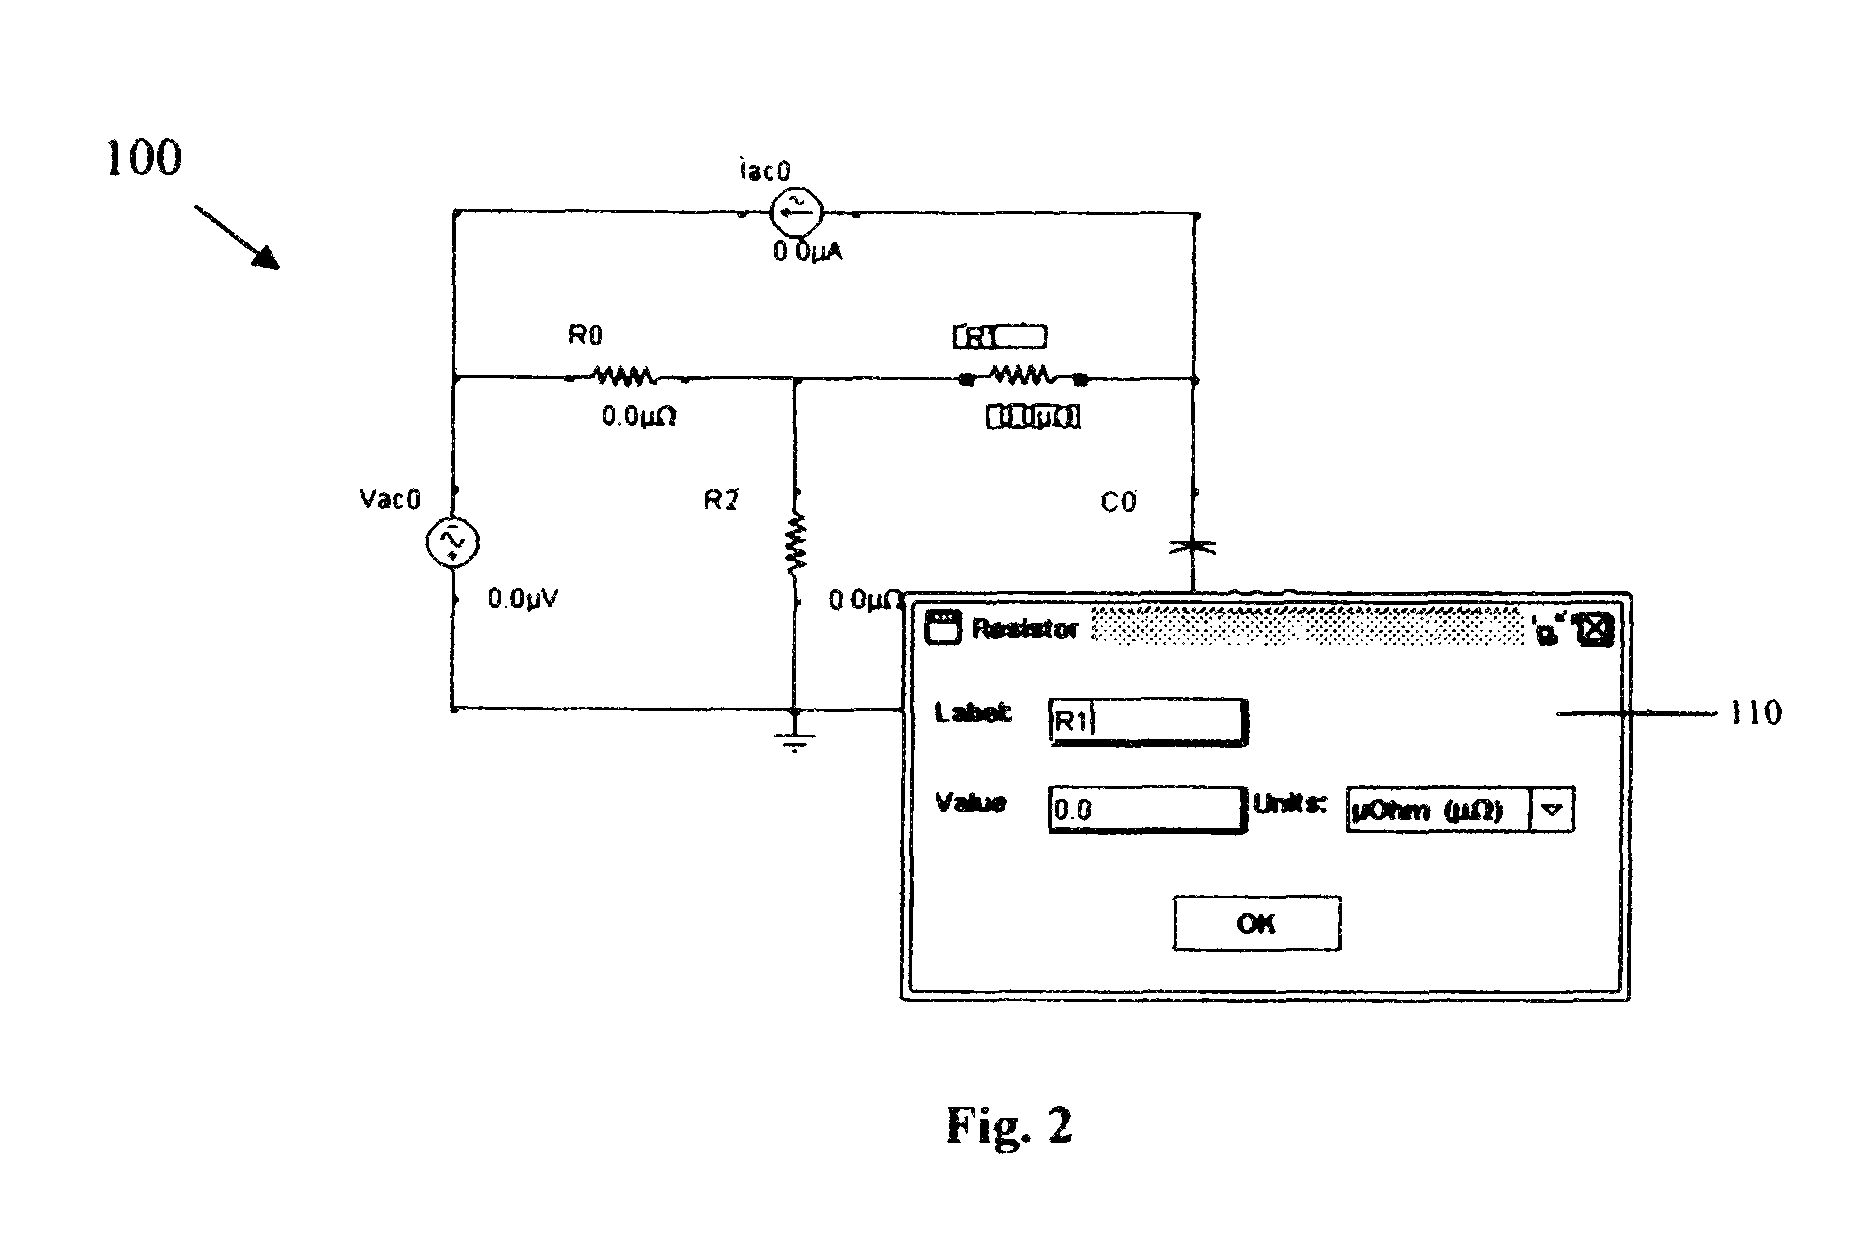 Symbolic switch/linear circuit simulator systems and methods